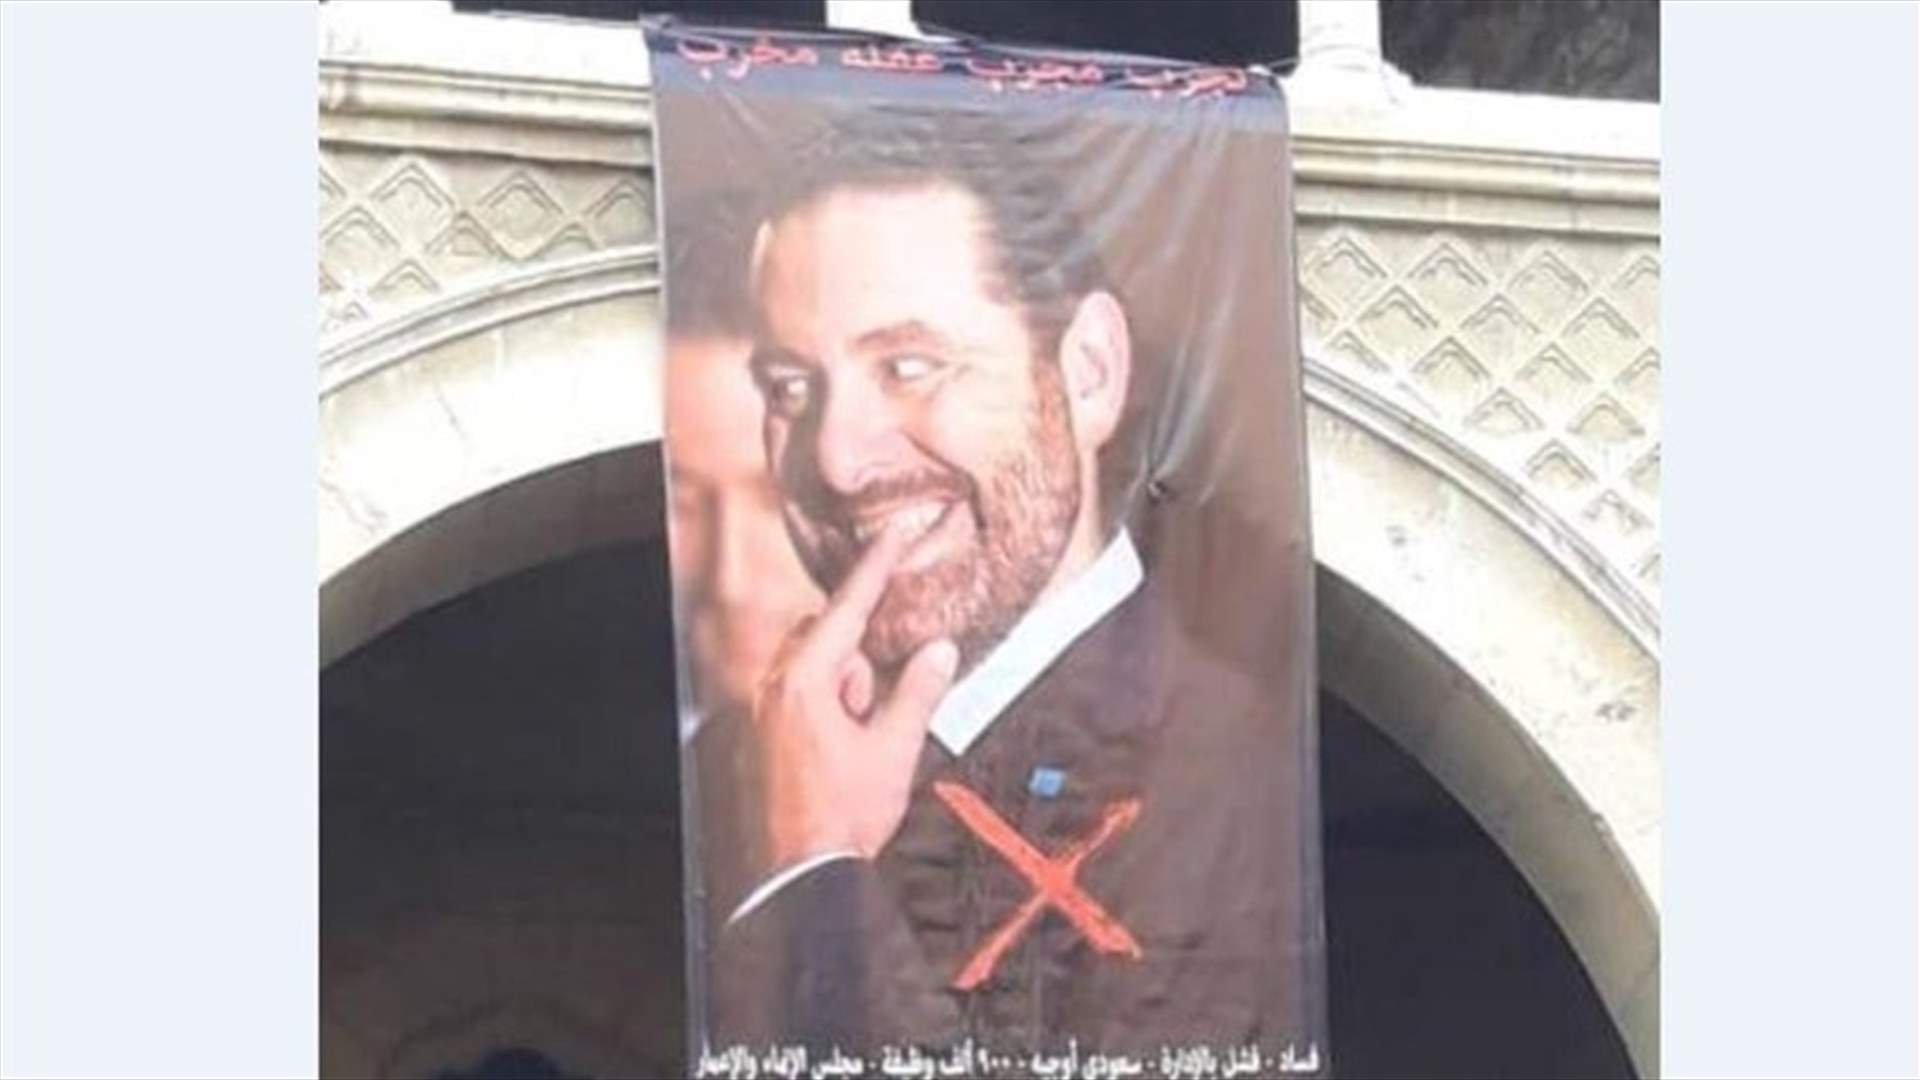 Large poster of Hariri placed in Riad al-Solh in rejection to his return to power (Photo)